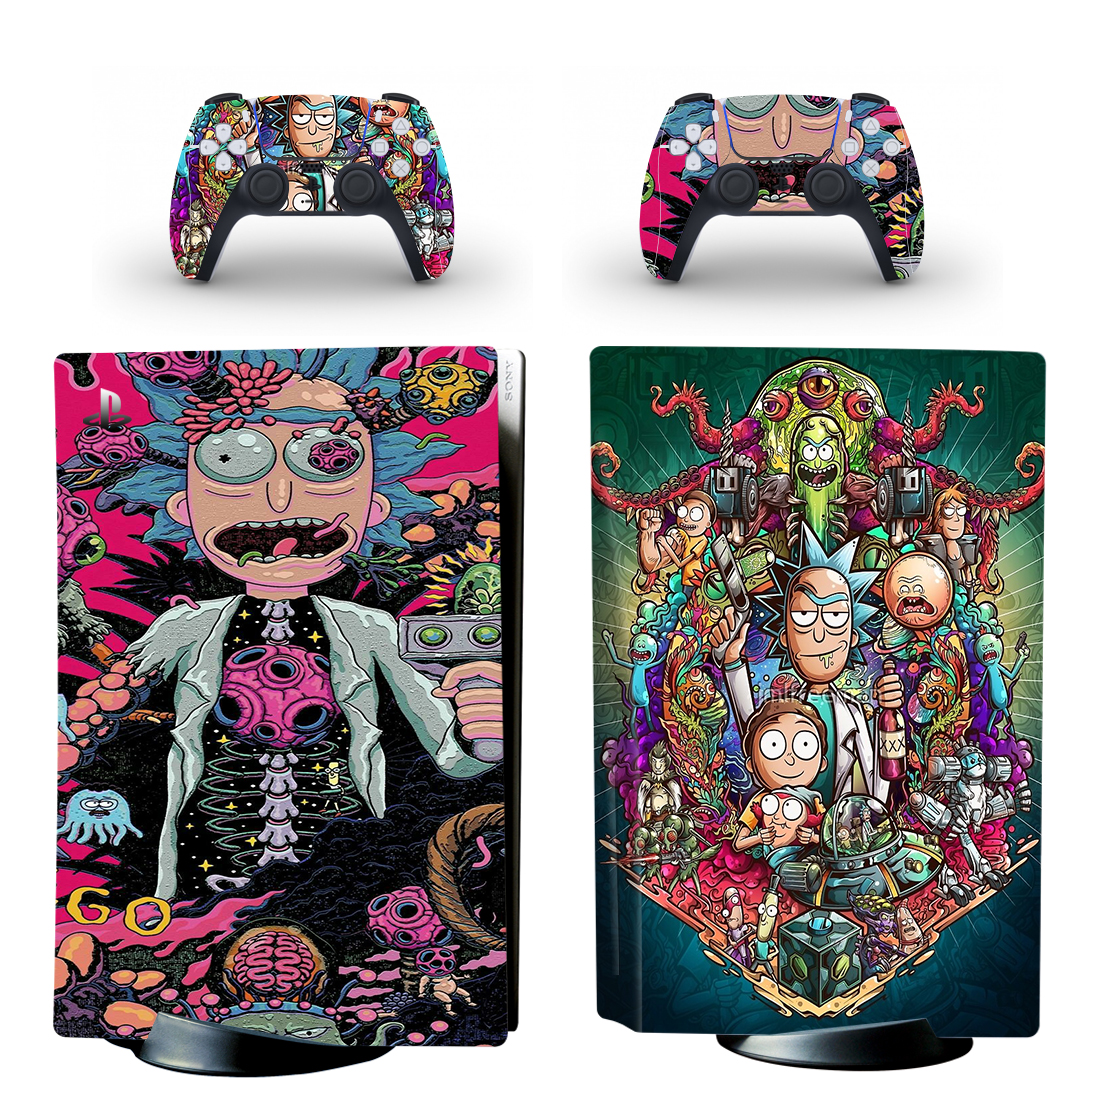 Rick And Morty PS5 Skin Sticker For PlayStation 5 And Controllers